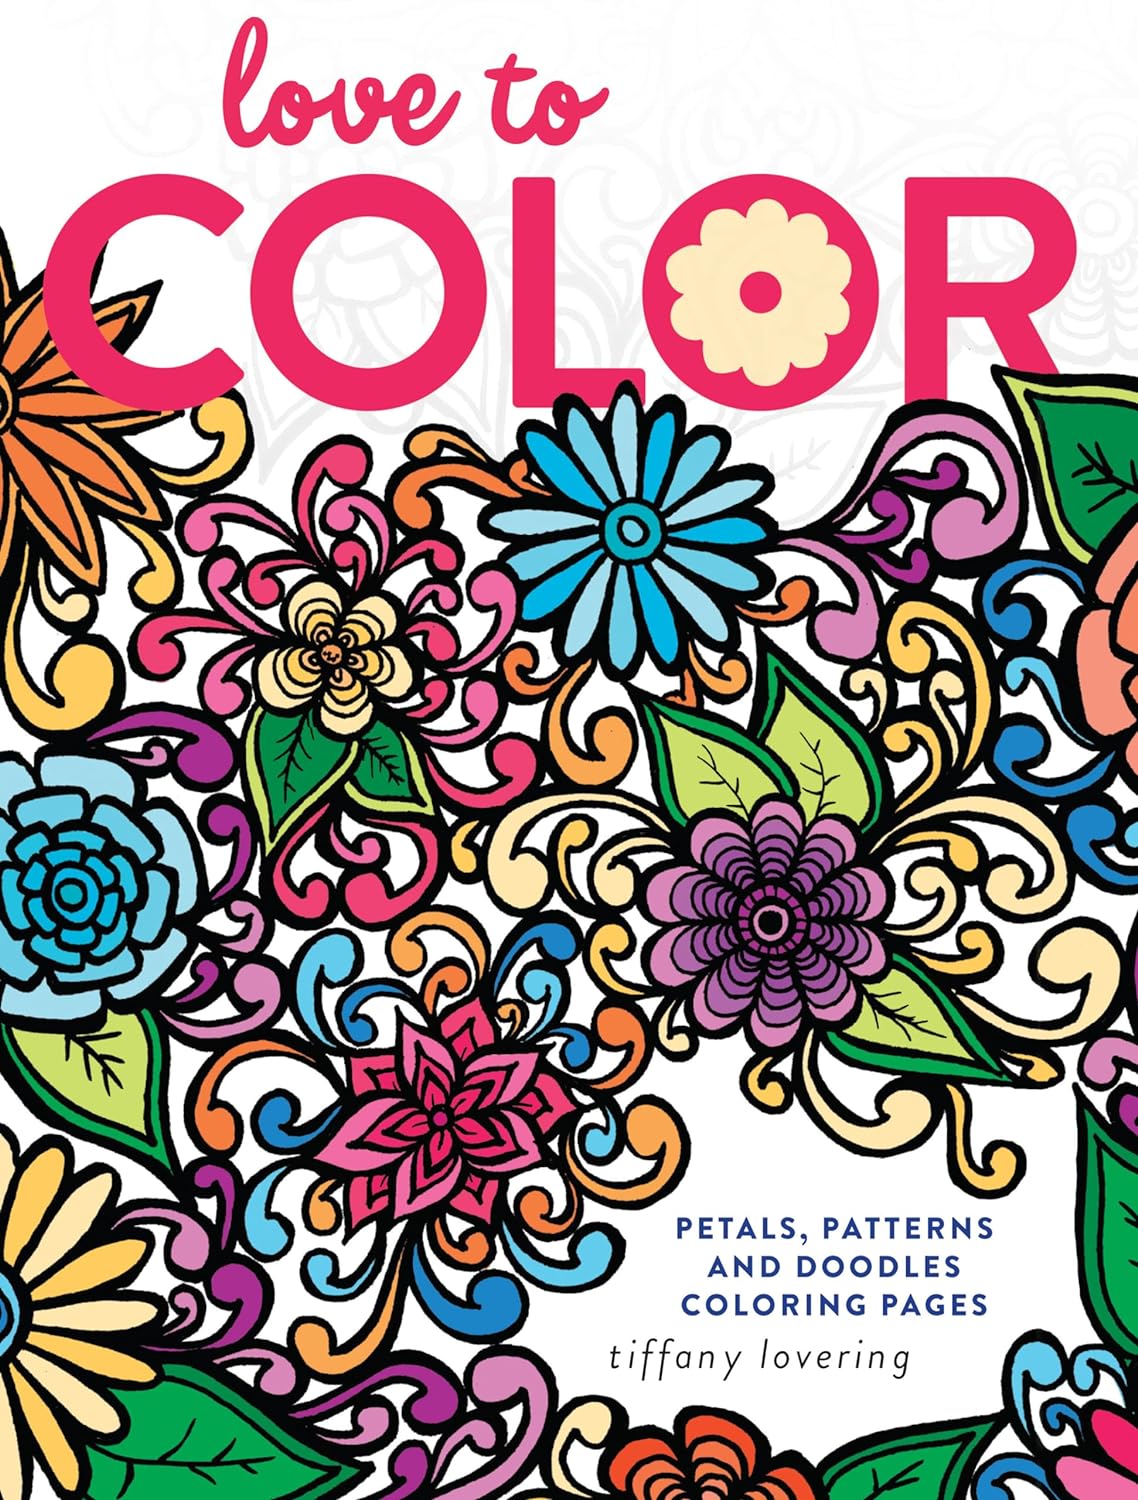 Love to Color: The Ultimate Stress-Relief Coloring Book for Adults - Original